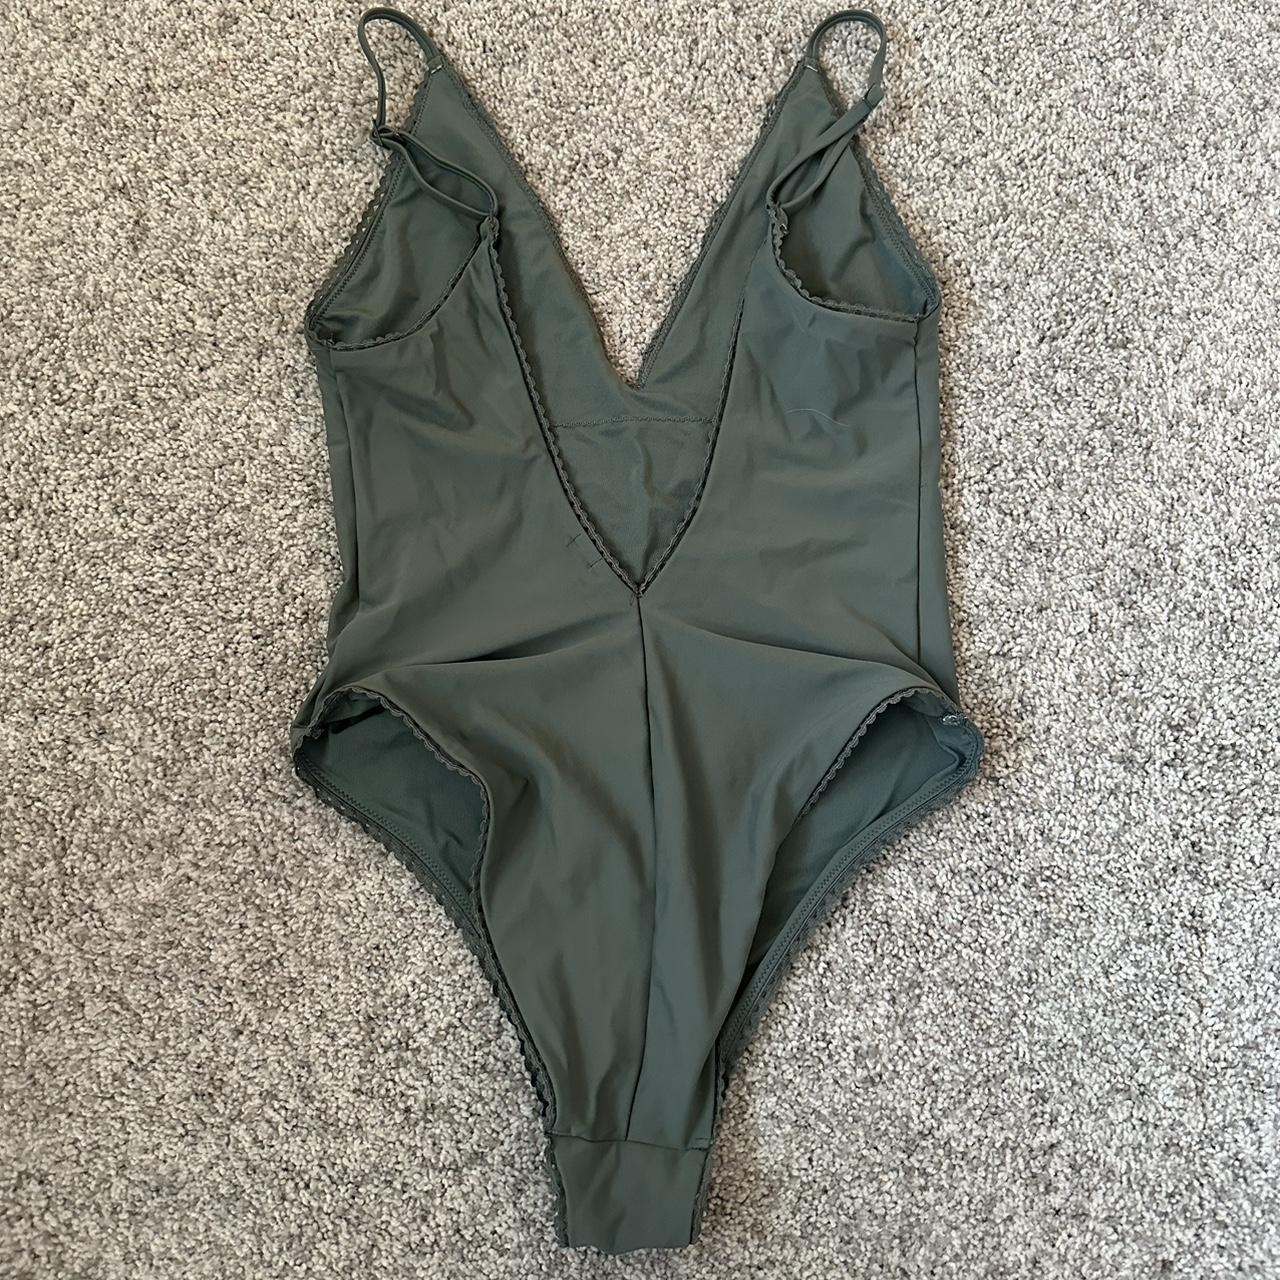 Aerie v-neck one piece swimsuit in this pretty... - Depop